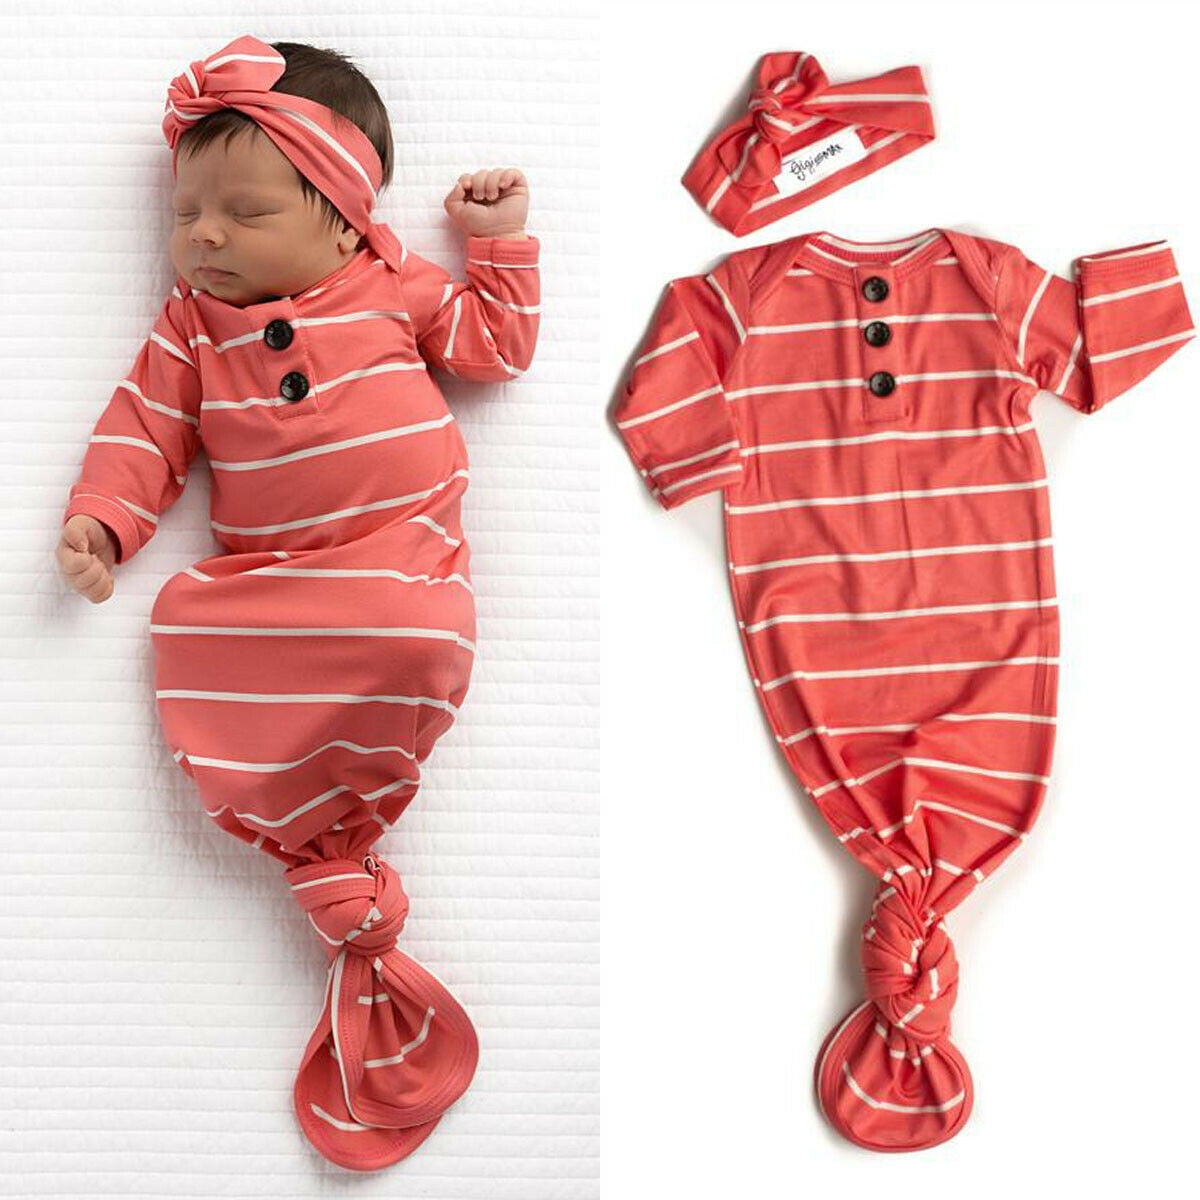 Newborn Baby Girl Sleepwear Nightgown Floral Sleeping Gown Headband Sleeping Bags Coming Home Outfits 0-6Months 